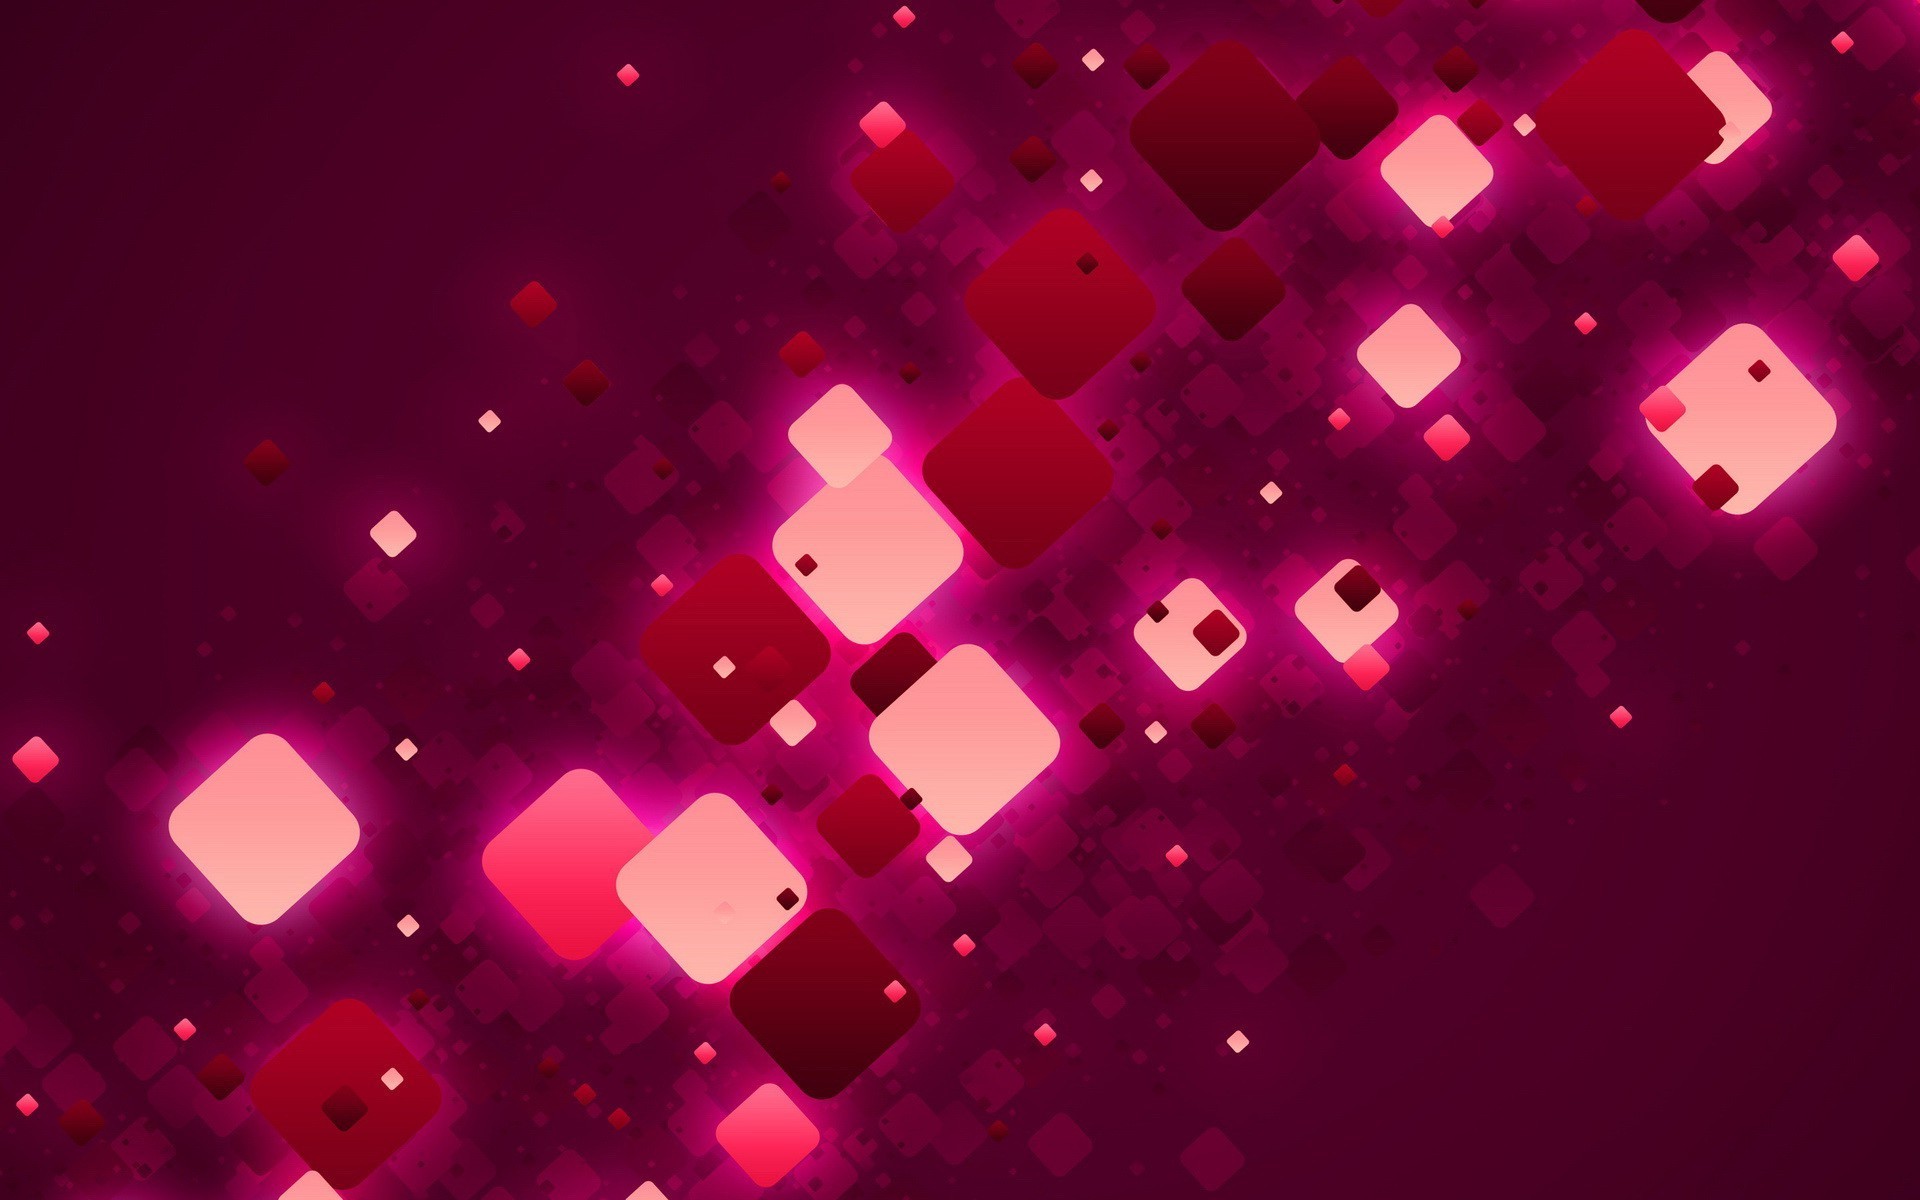 Red and pink squares abstract hd wallpaper.